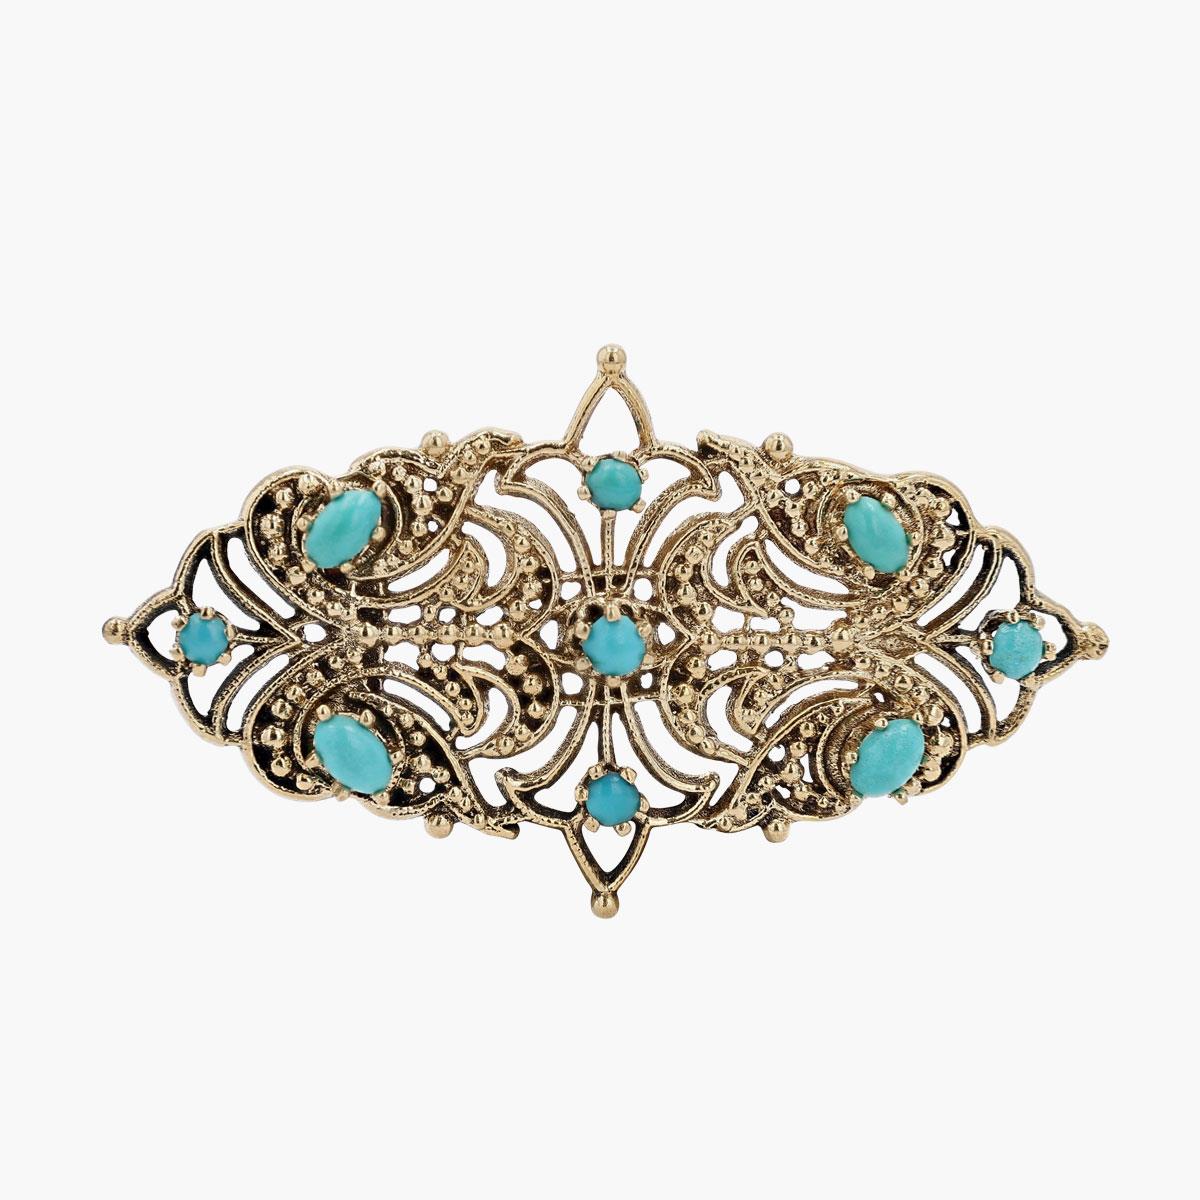 Vintage 14K Yg Brooch With Turquoise Beads